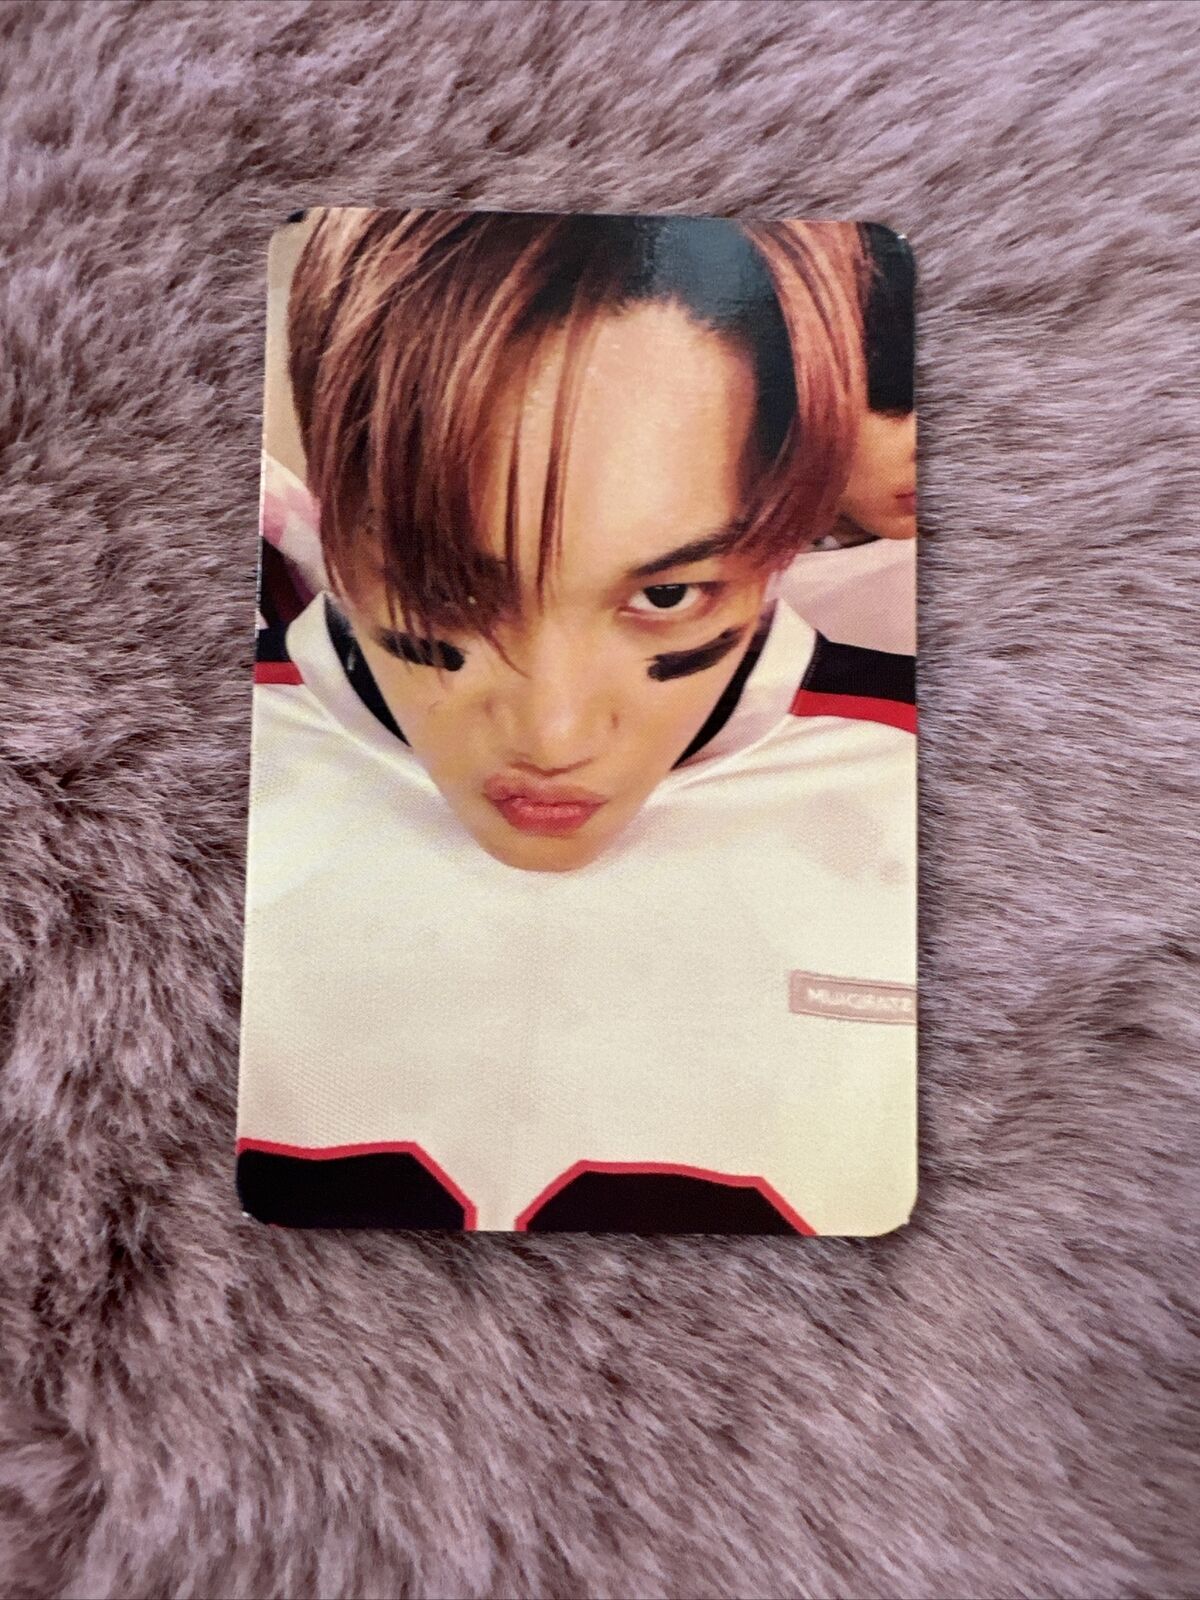 Exo Kai \'Love Me Right\' Official Photocard + FREEBIES